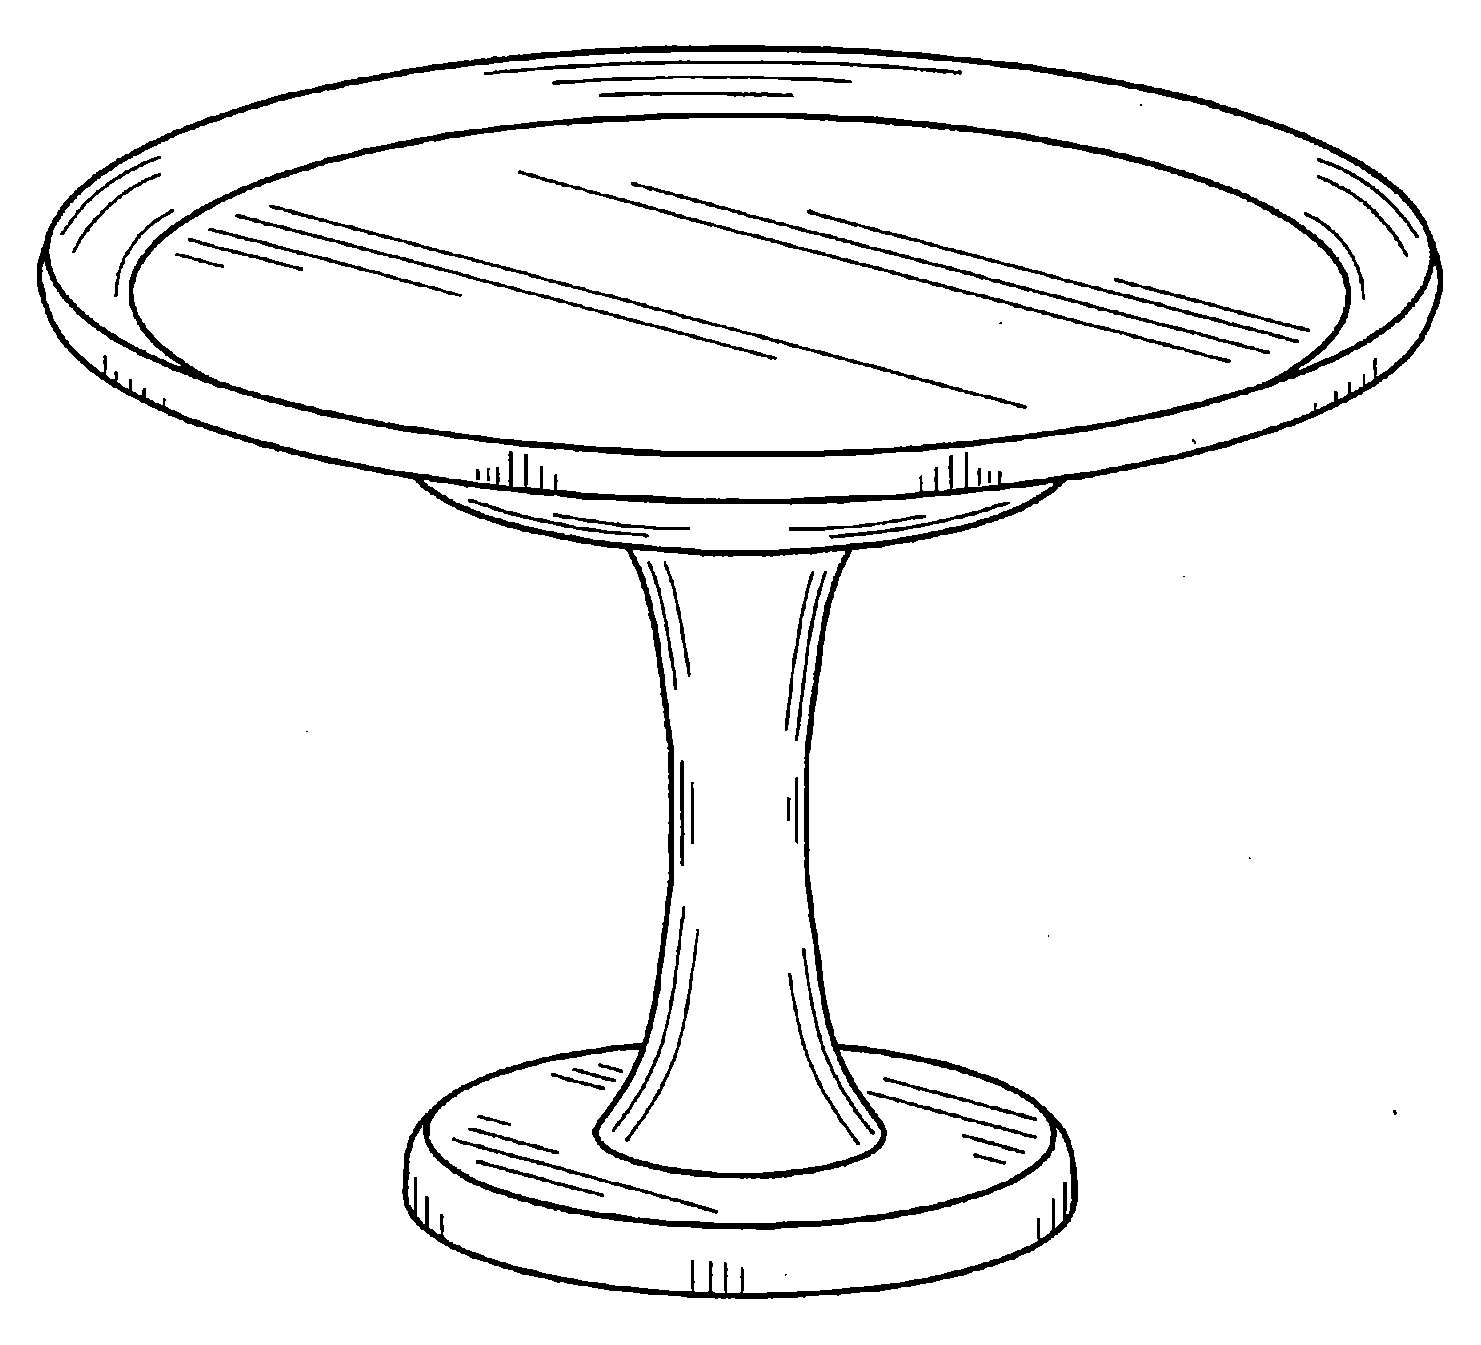 Example of a design for a food server with a columnar support. 
